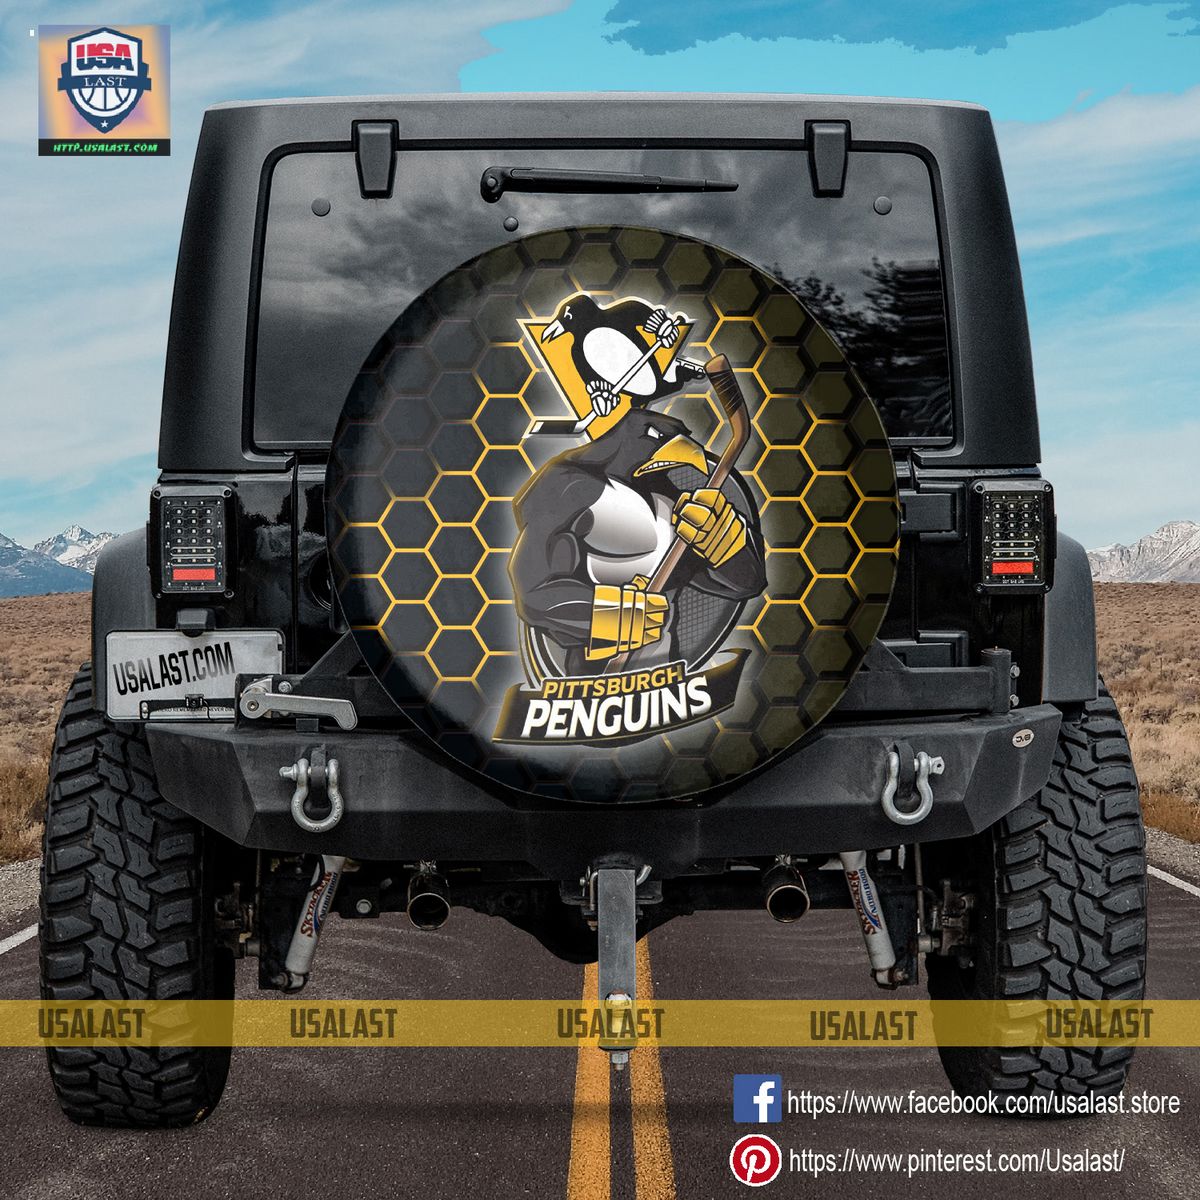 Pittsburgh Penguins MLB Mascot Spare Tire Cover - You look lazy